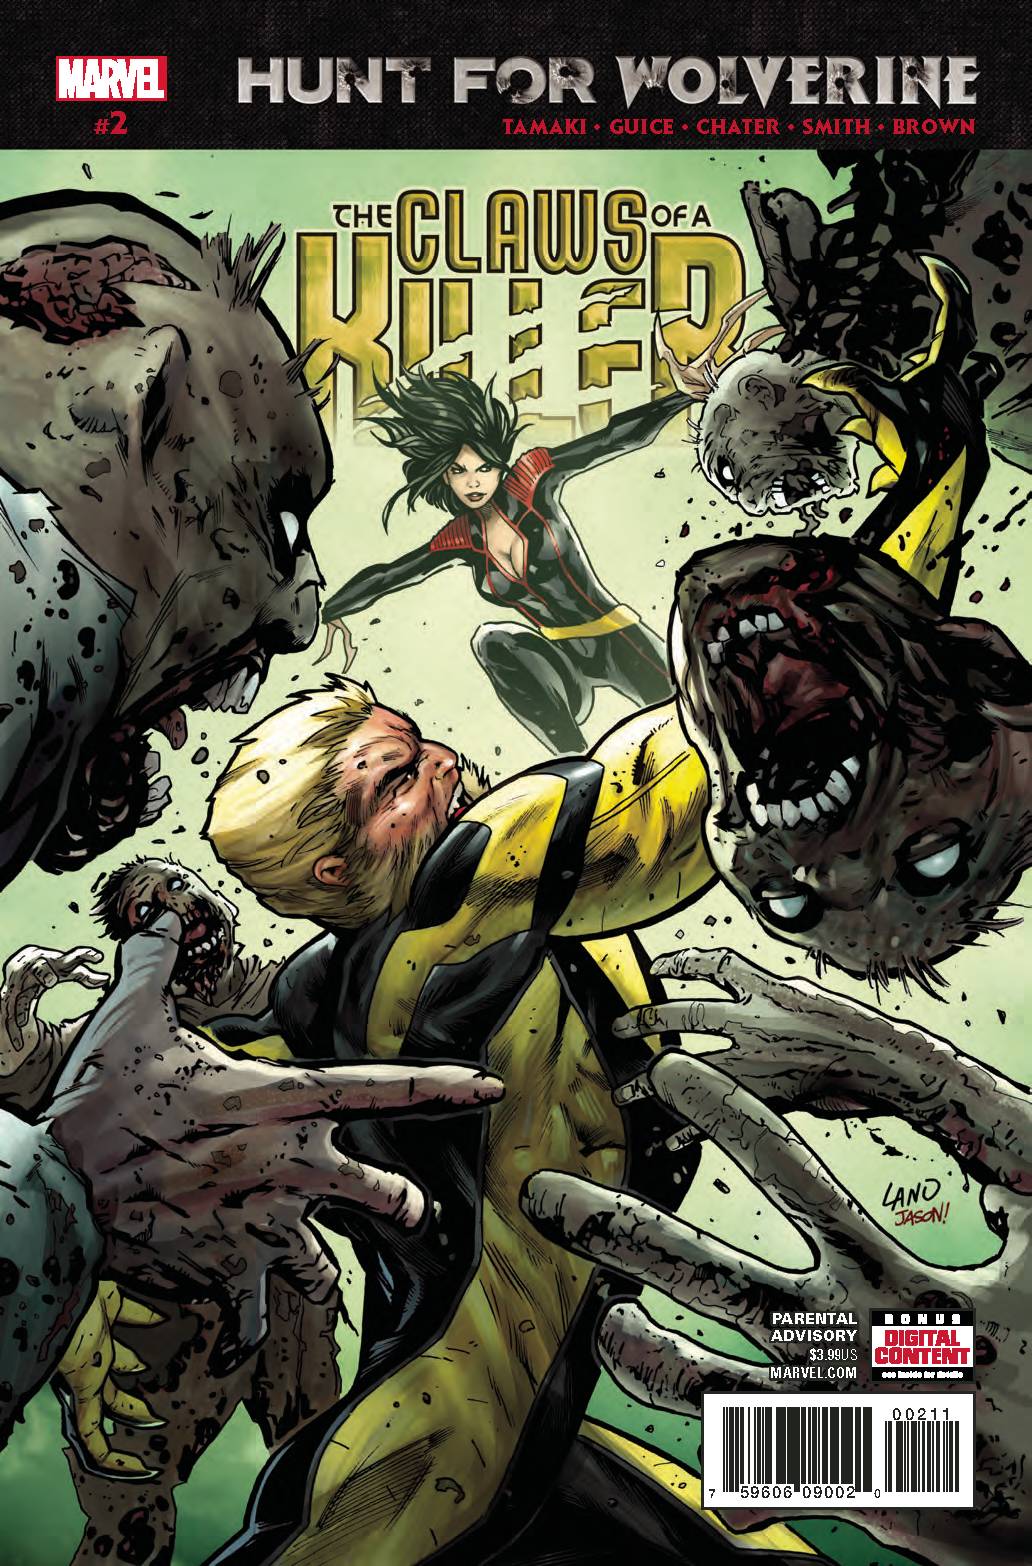 HUNT FOR WOLVERINE CLAWS OF KILLER #2 (OF 4) (06/20/2018)